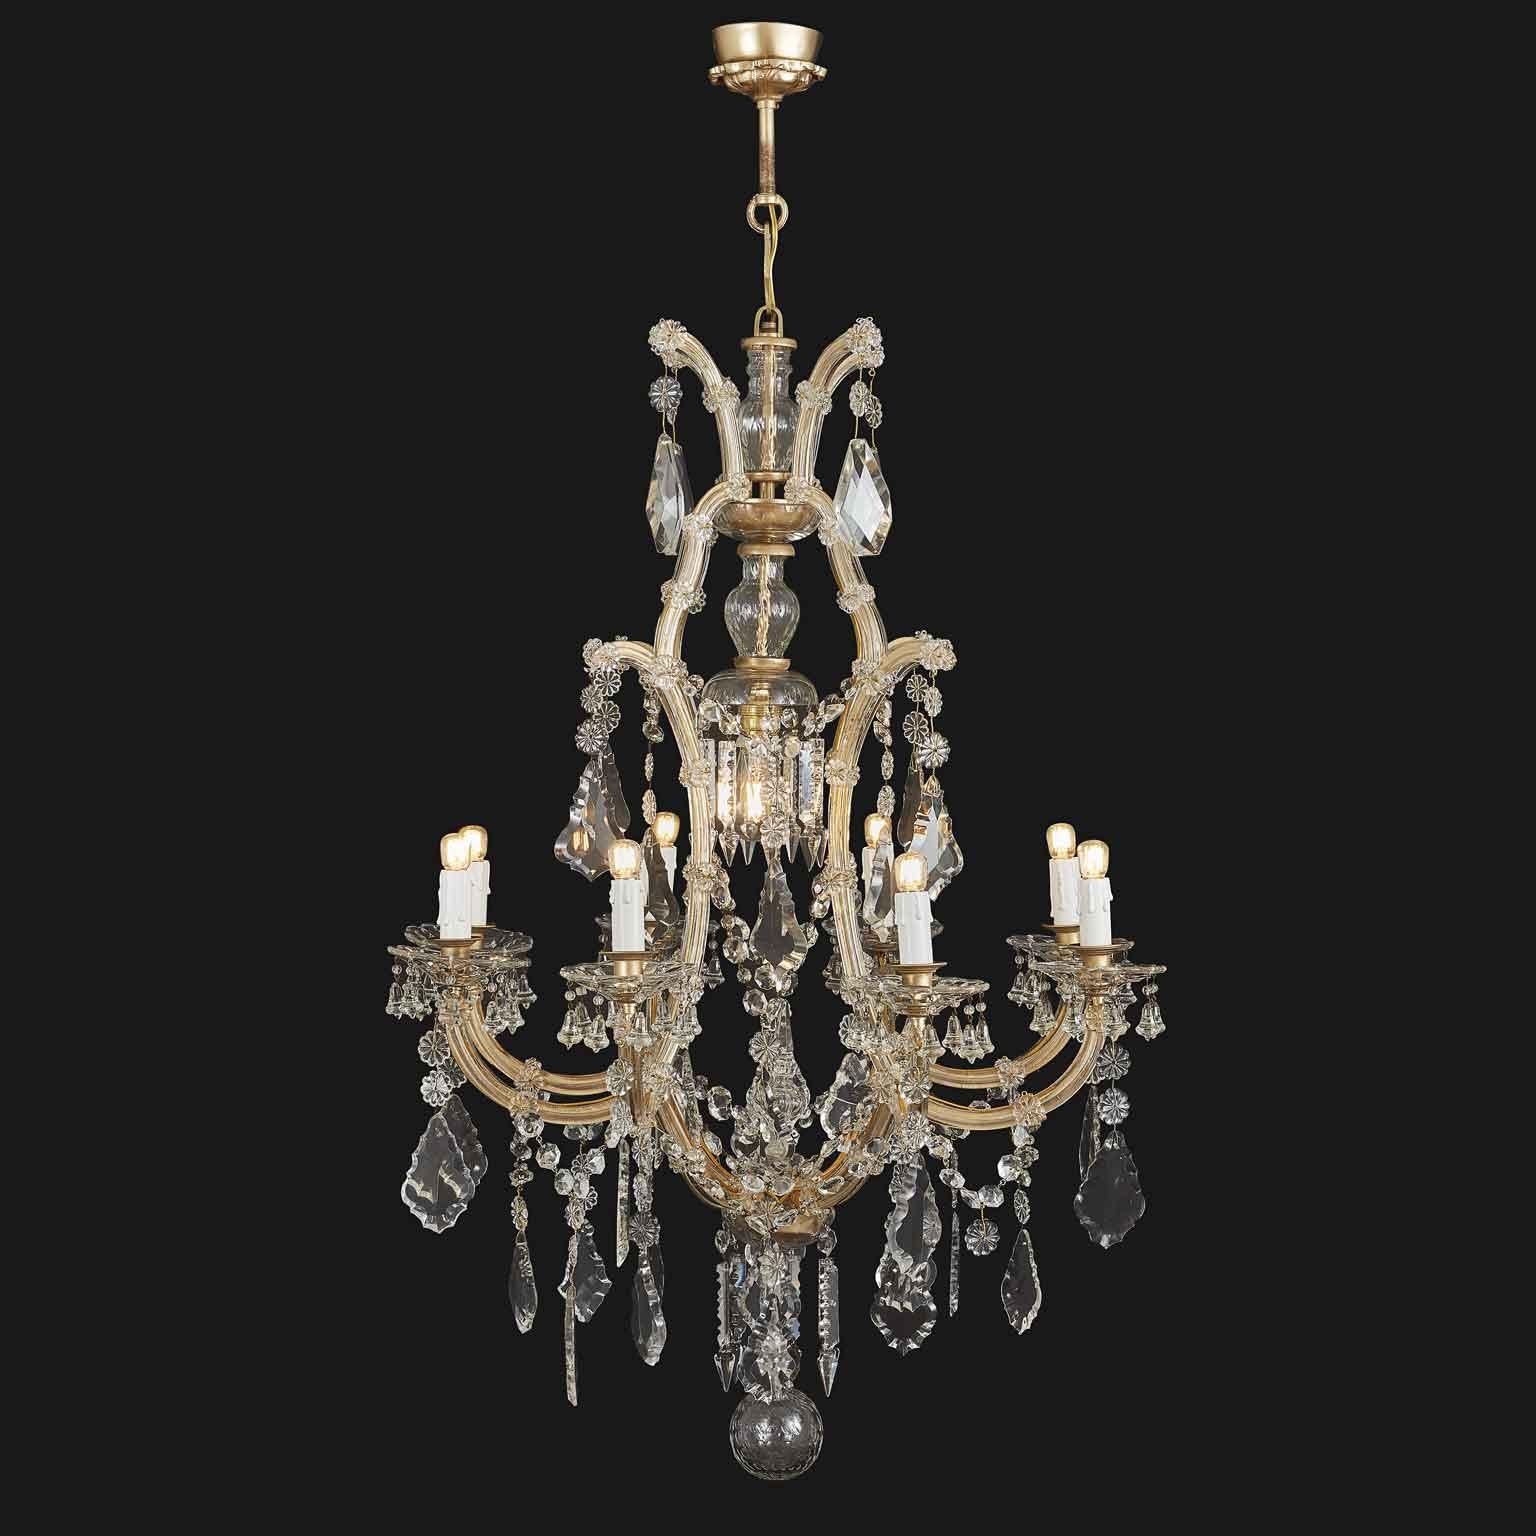 Italian Maria Theresa style nine-armed crystal chandelier dating back to 20th century. Nine arms ending with E14 light bulbs and an extra E27 bulb in the centre of the structure. This Italian vintage chandelier features a variety of faceted crystals